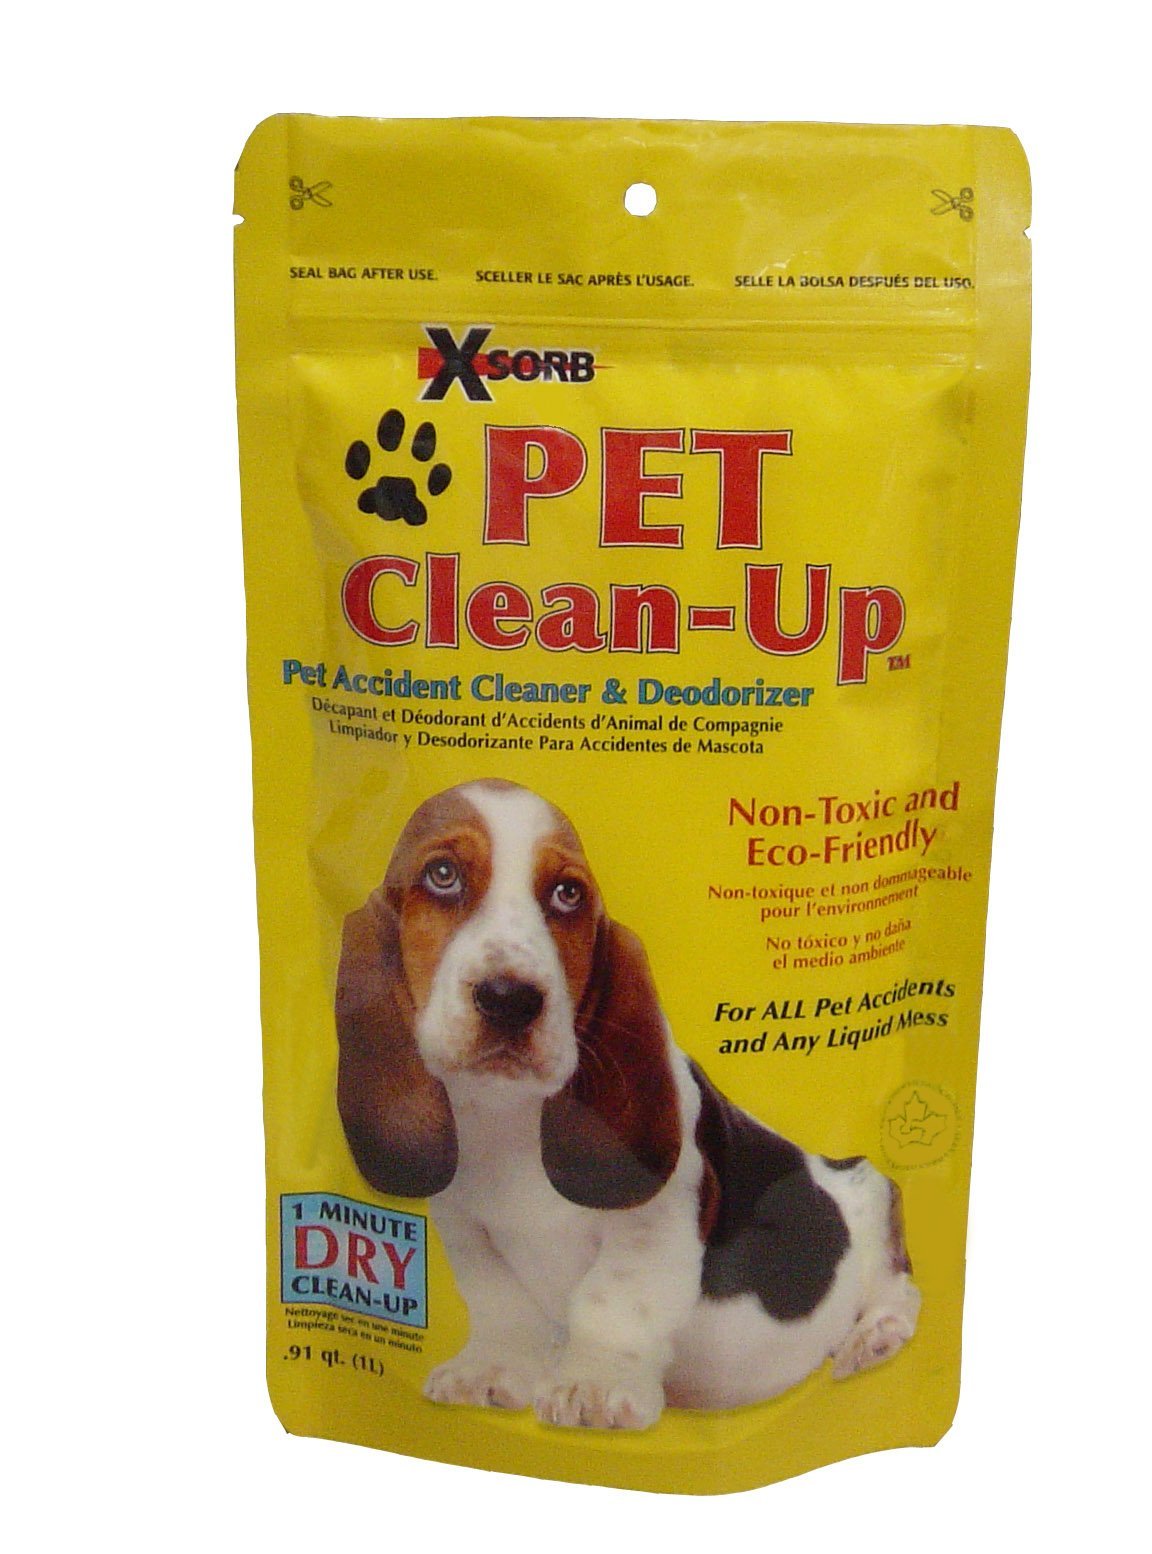 XSORB Pet Accident Clean-Up 1 Liter Bag - 12/CASE-eSafety Supplies, Inc